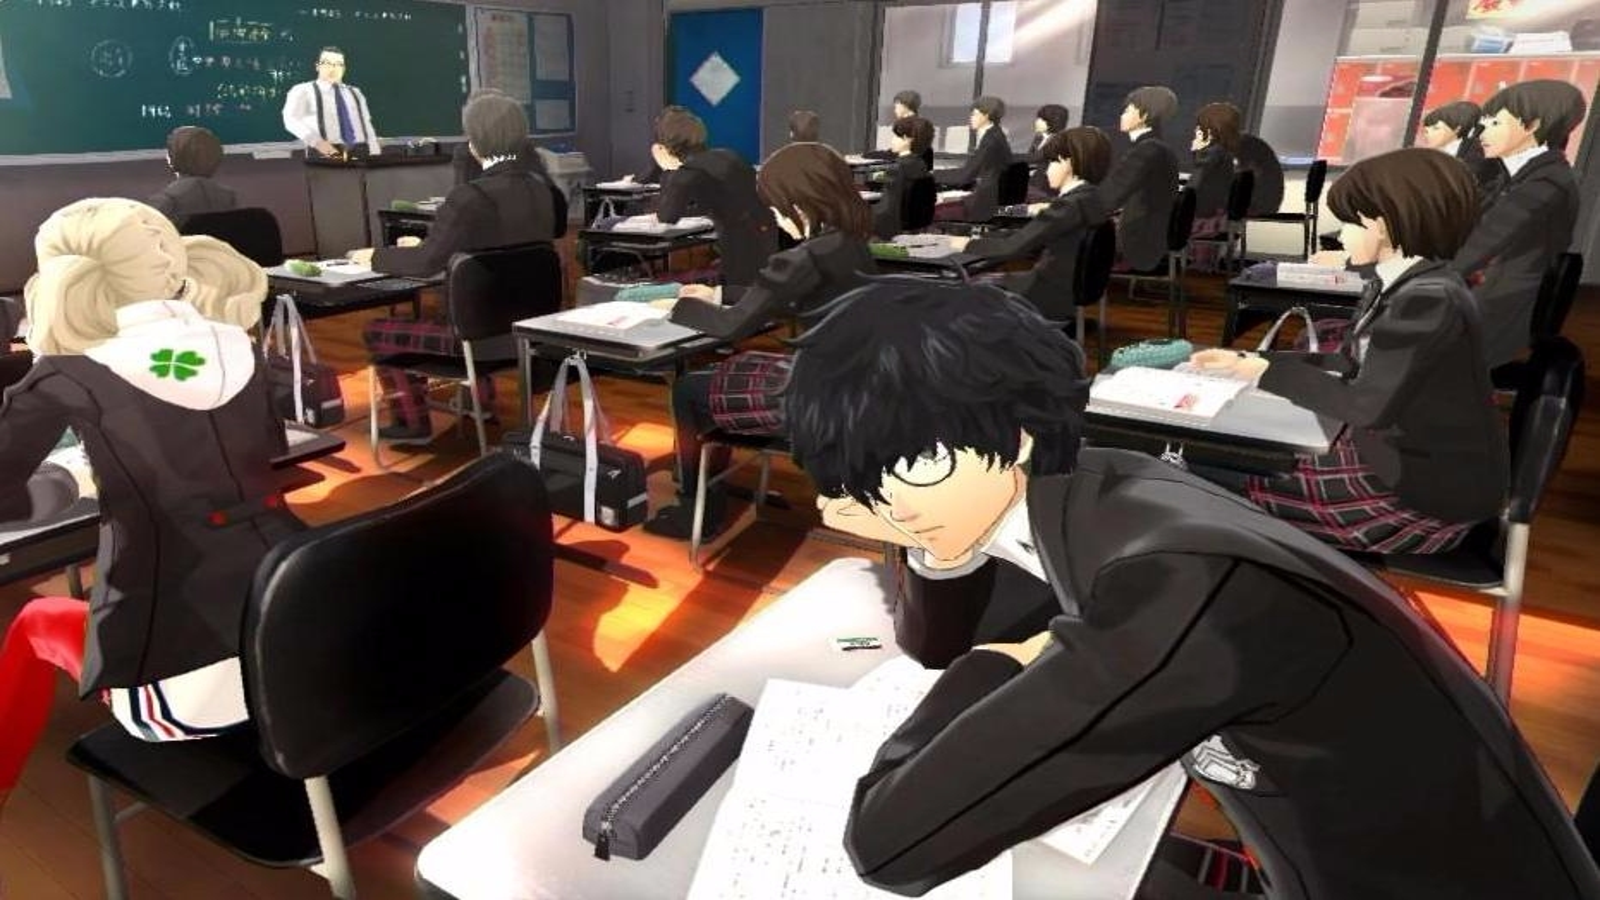 Persona 5 Royal: All Exams & Class Quiz Answers